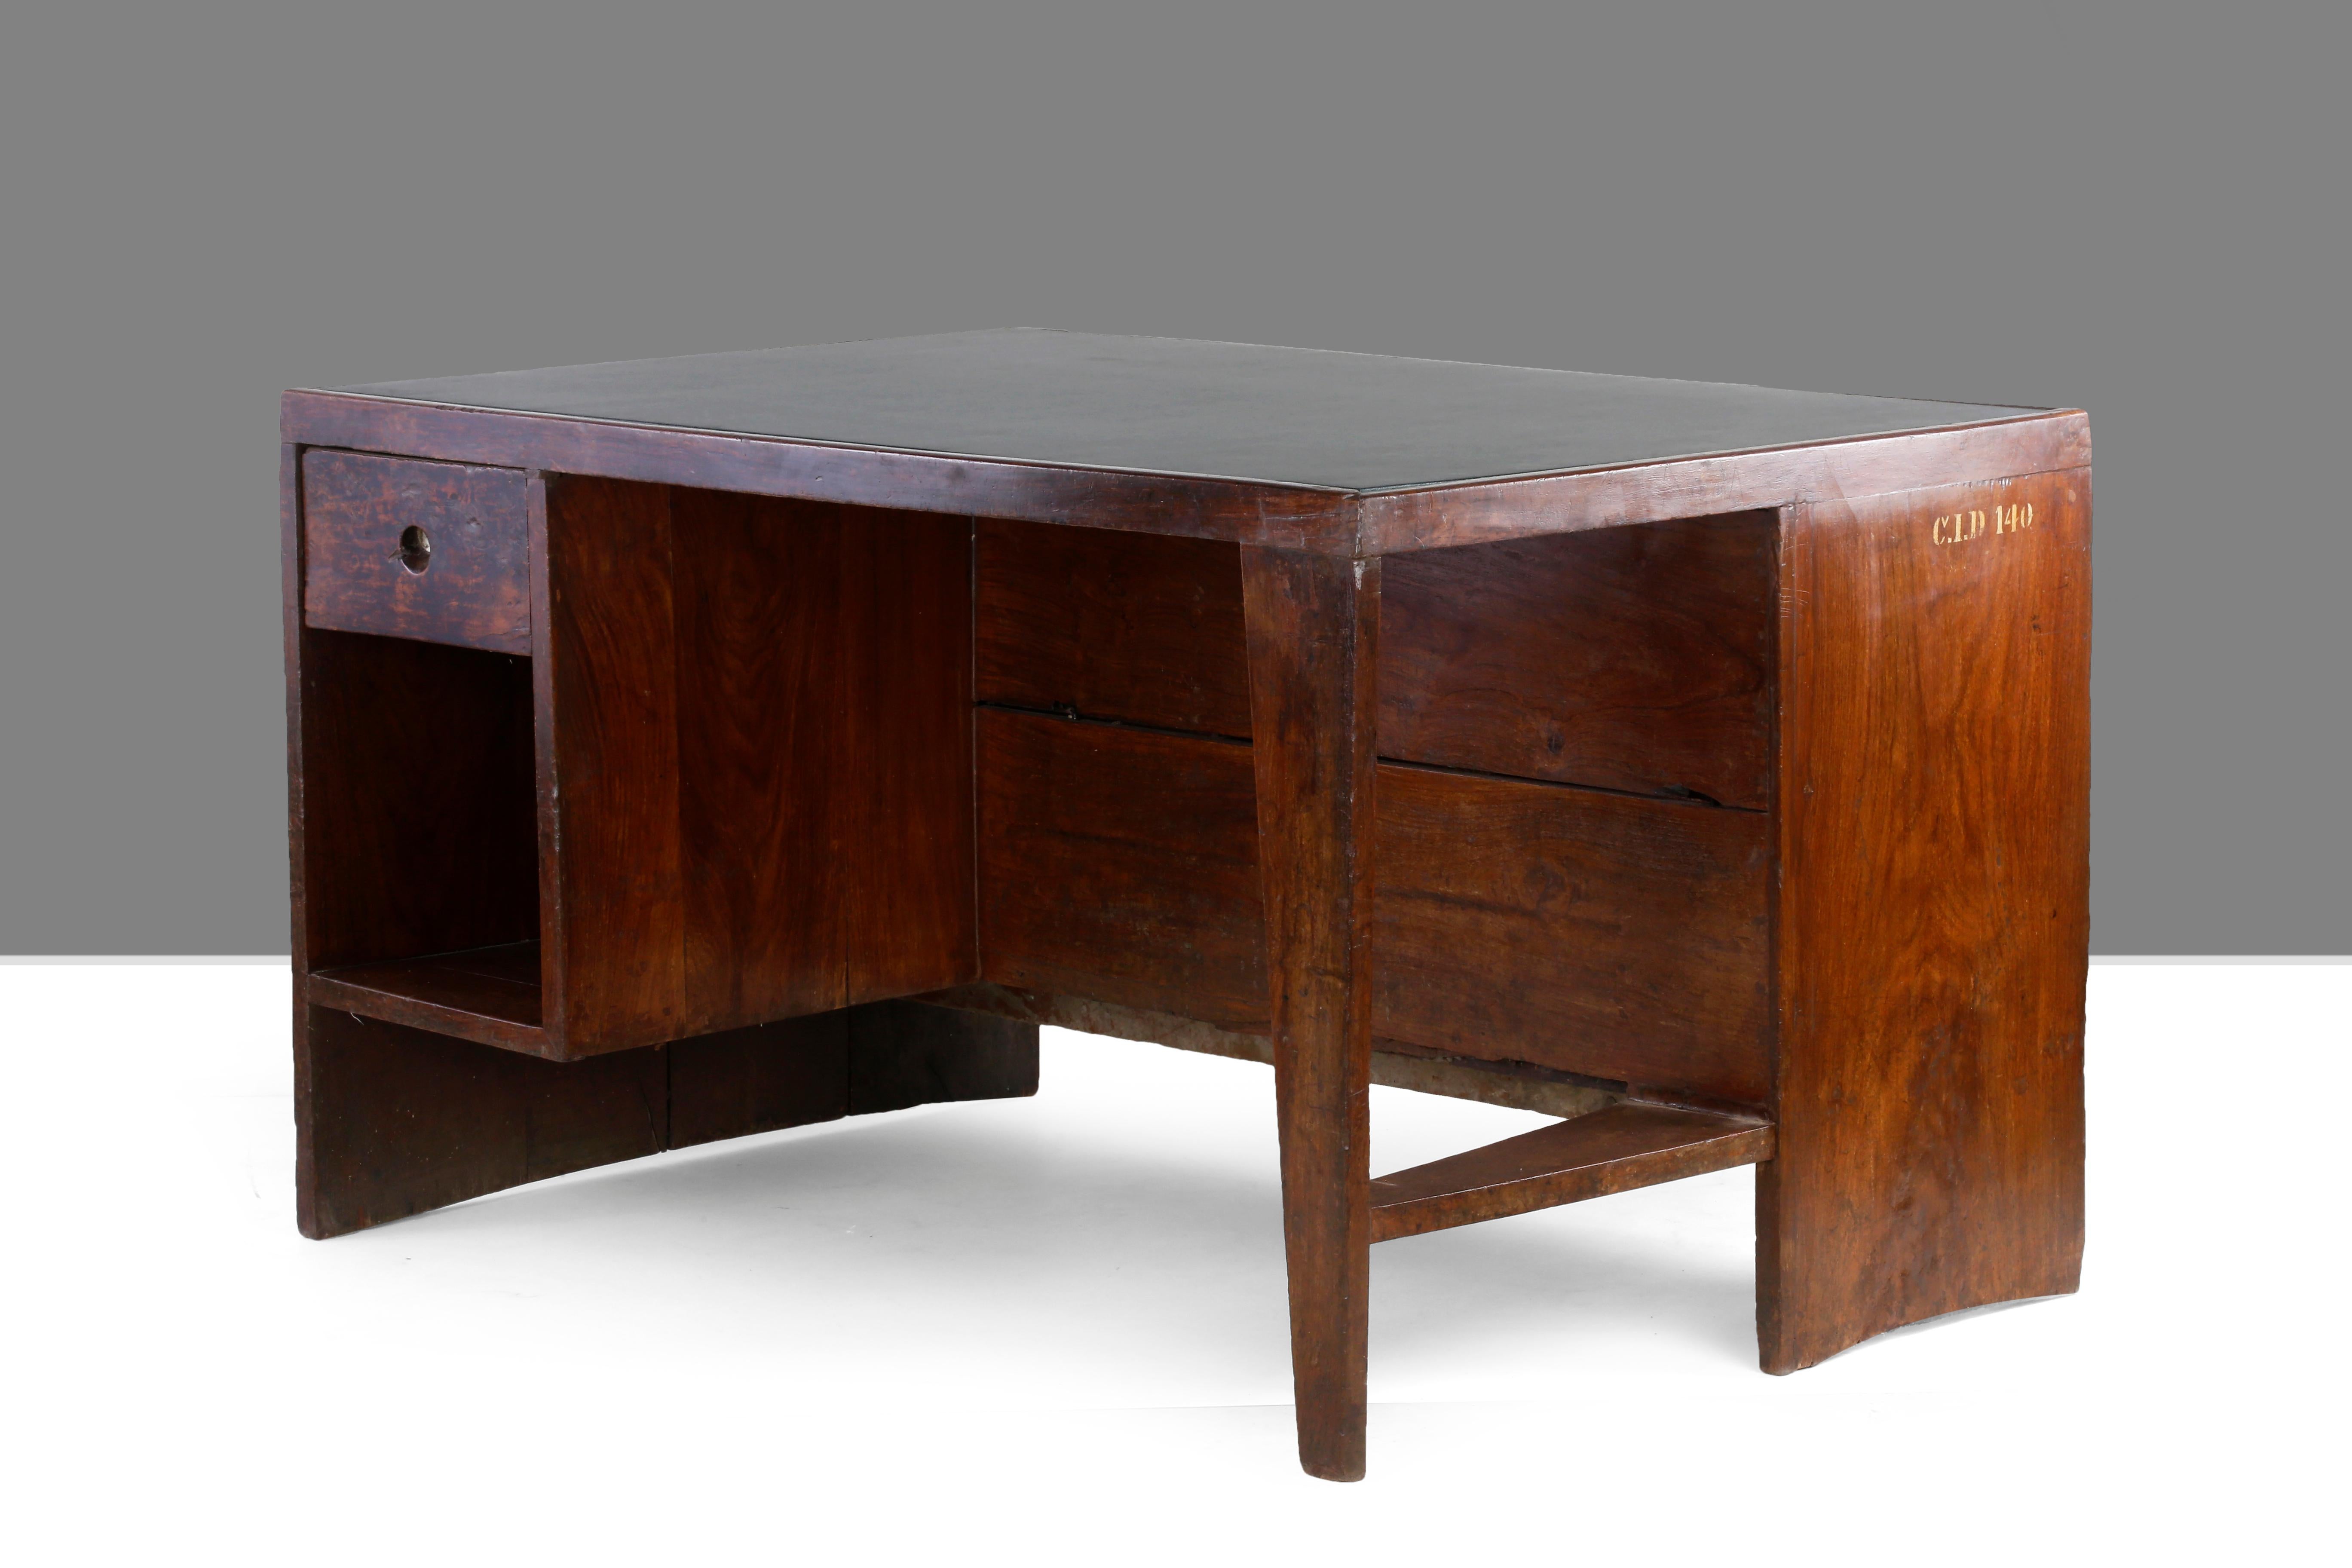 Indian Pierre Jeanneret Authentic Office Desk from Chandigarh with signes